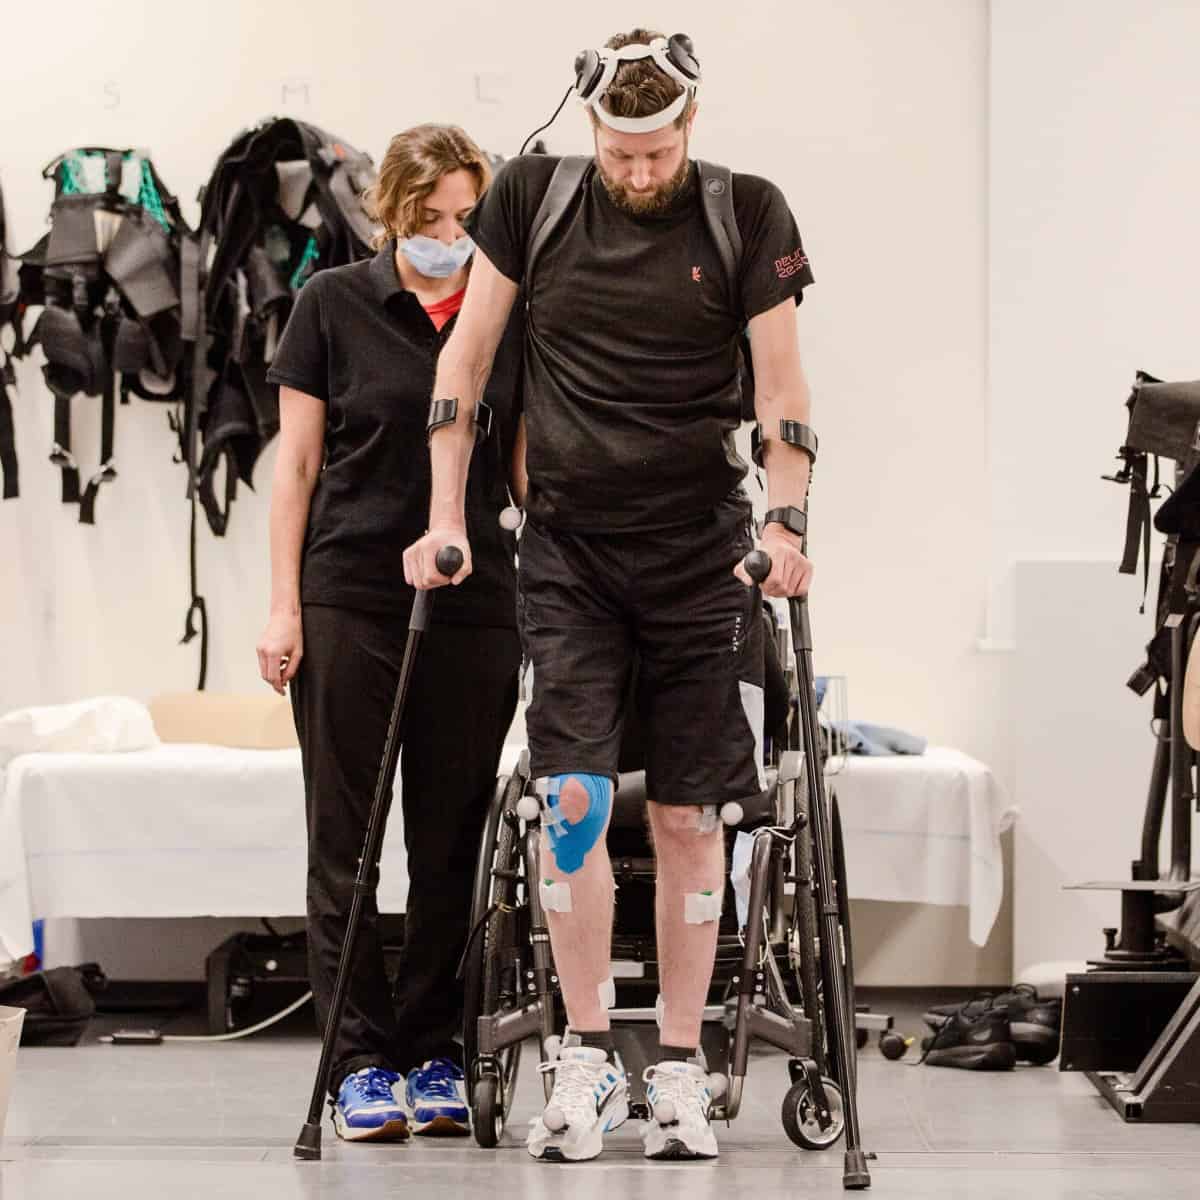 Award-winning technology allows a paralysed person to walk, new journal focuses on sustainability